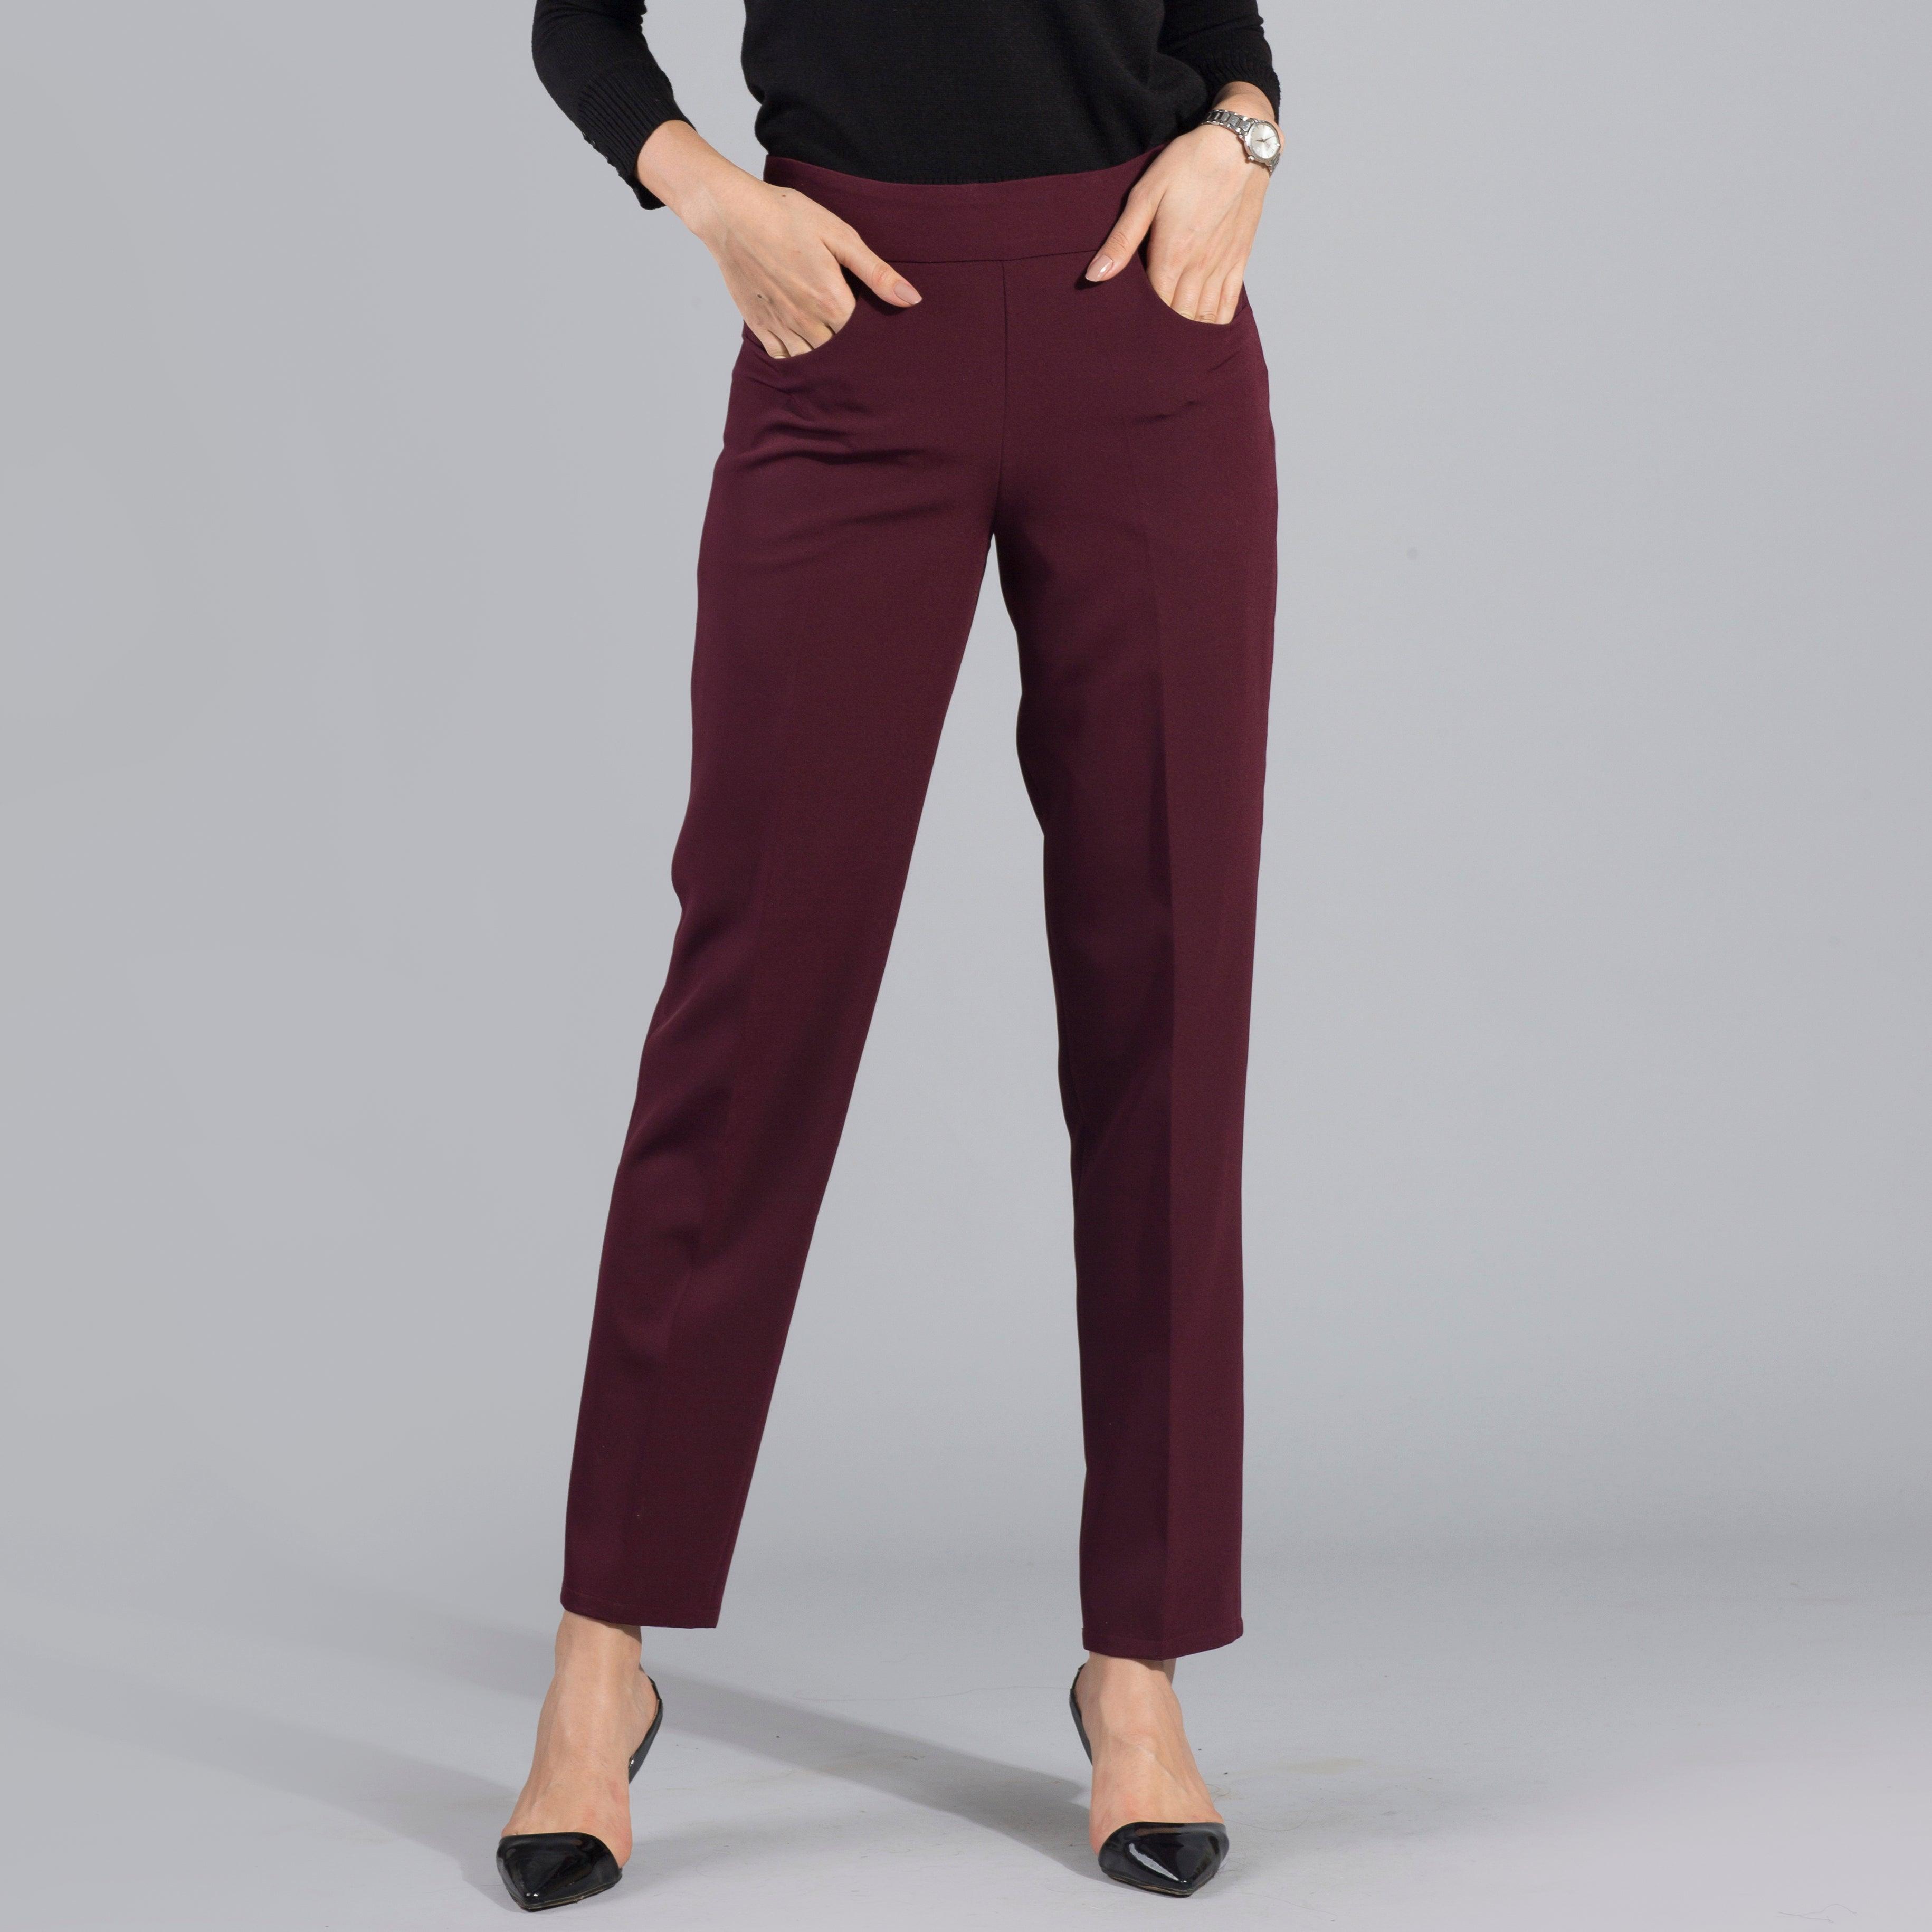 Essential Easy Care Work Trousers - Maroon| Formal Trousers